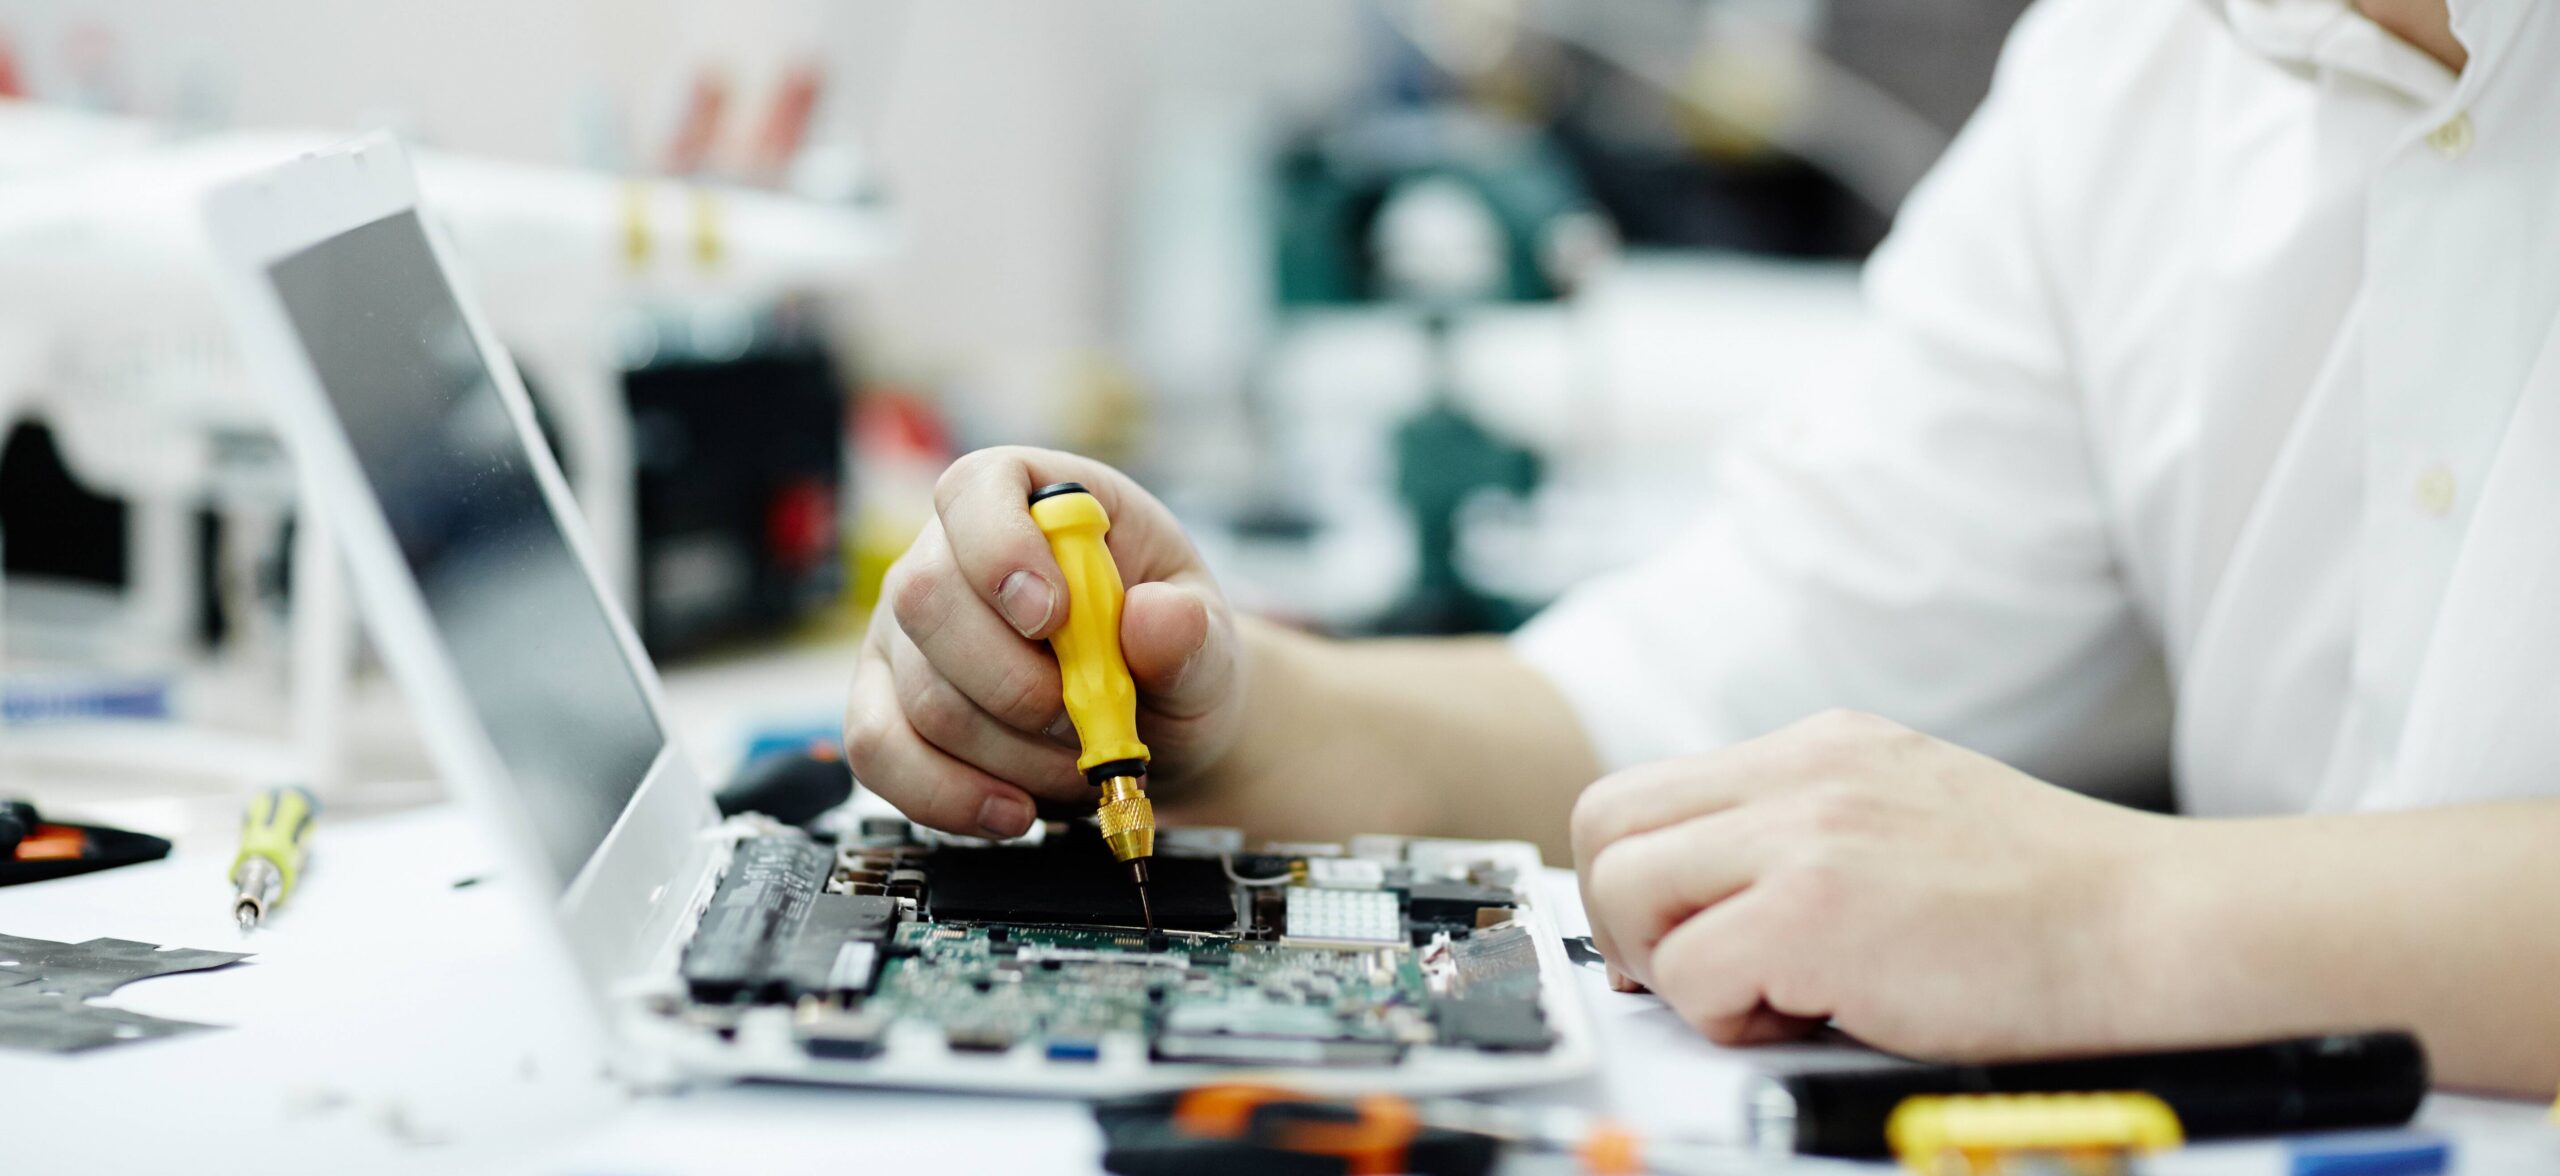 Şile Computer Repair and Technical Service